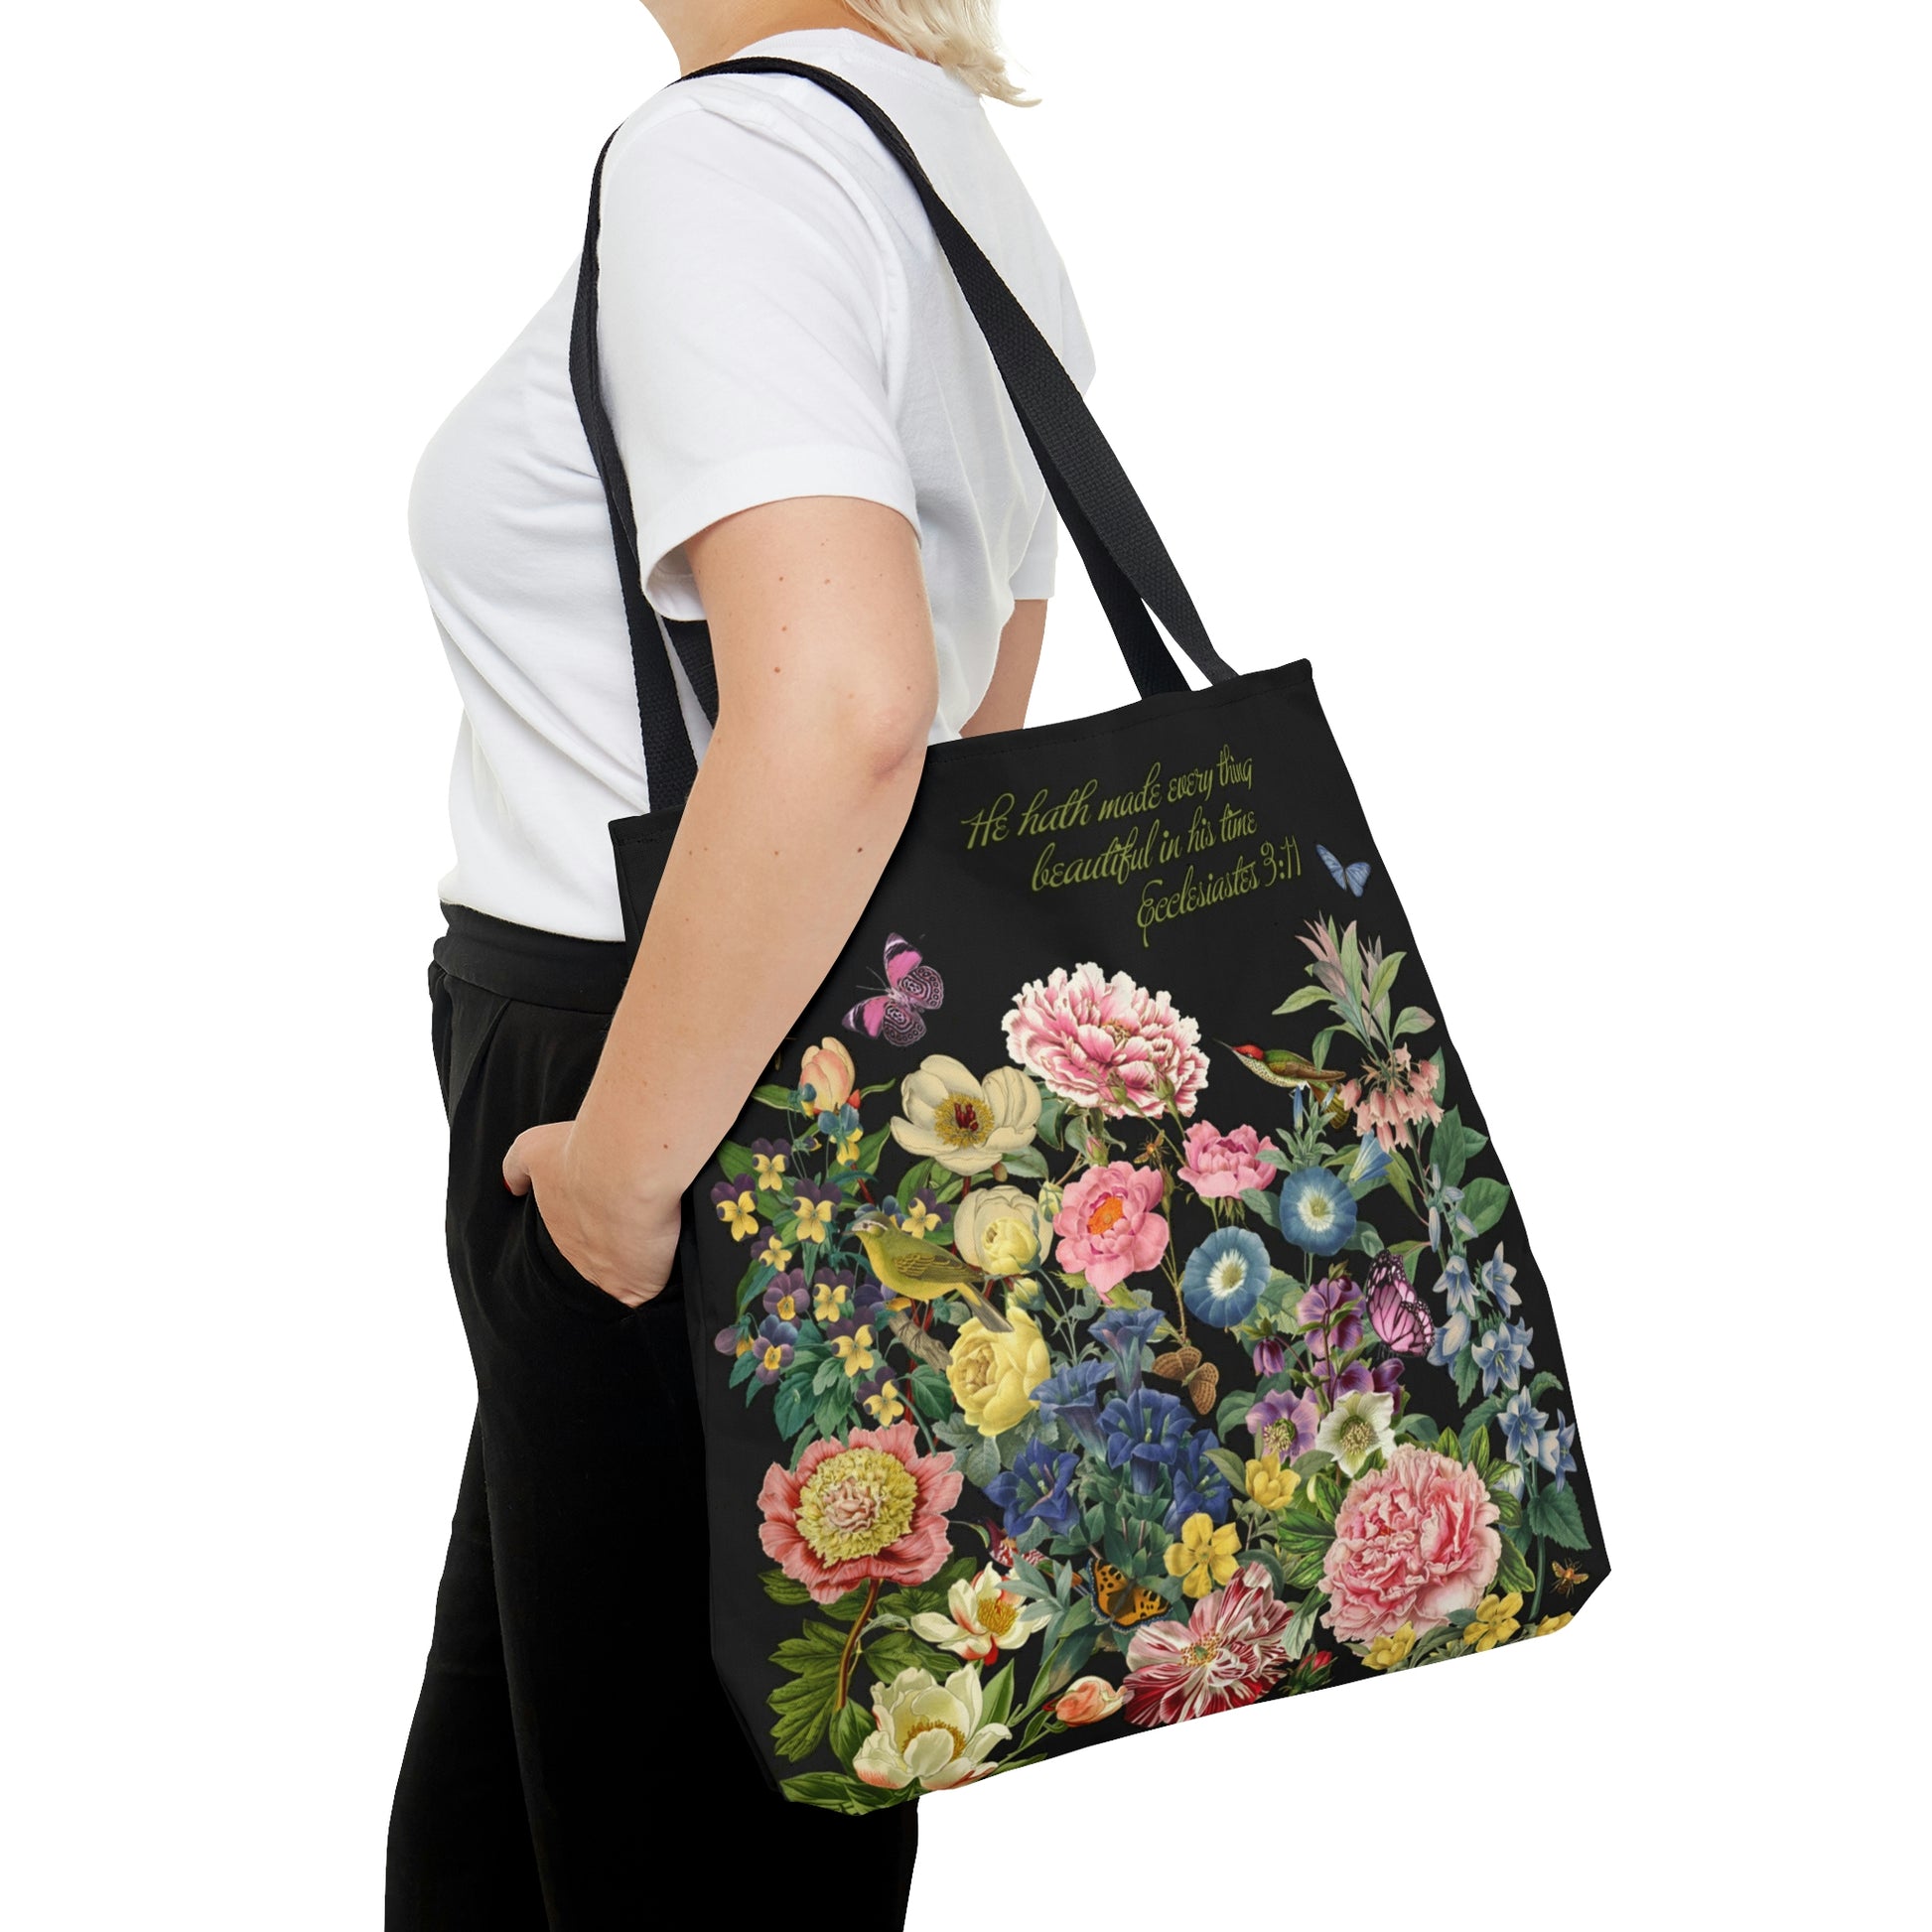 Floral Tote Bag "He hath made every thing beautiful in his time" Ecclesiastes 3:11